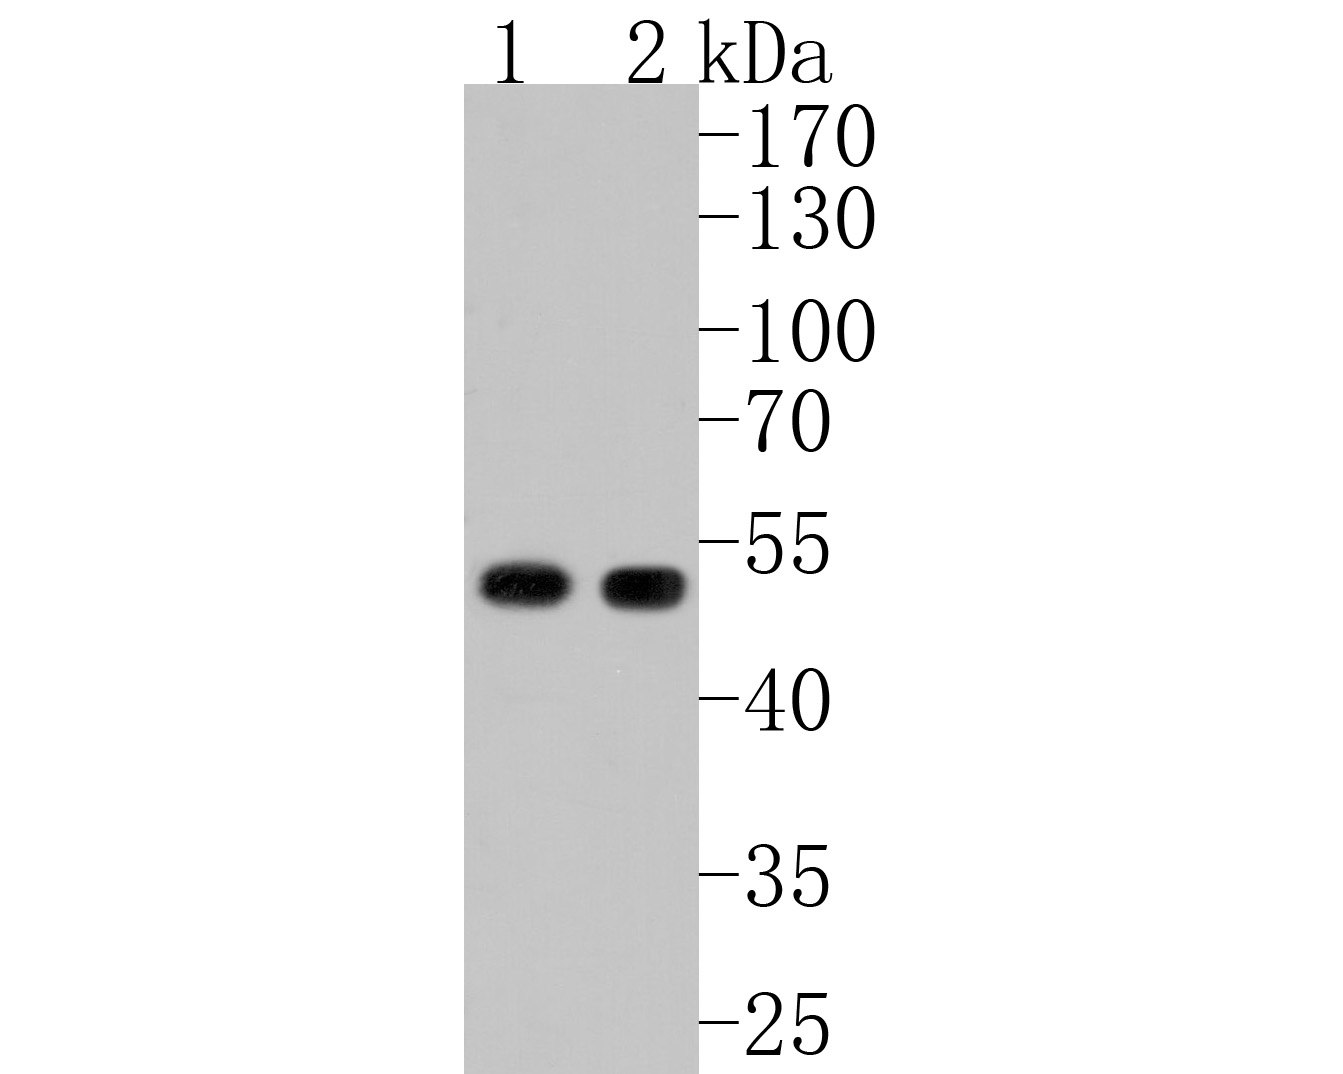 Western blot analysis of PAI1 on different lysates. Proteins were transferred to a PVDF membrane and blocked with 5% BSA in PBS for 1 hour at room temperature. The primary antibody (HA500124, 1/1,000) was used in 5% BSA at room temperature for 2 hours. Goat Anti-Rabbit IgG - HRP Secondary Antibody (HA1001) at 1:200,000 dilution was used for 1 hour at room temperature.<br />
Positive control: <br />
Lane 1: Rat brain tissue lysate<br />
Lane 2: Rat cerebellum tissue lysate